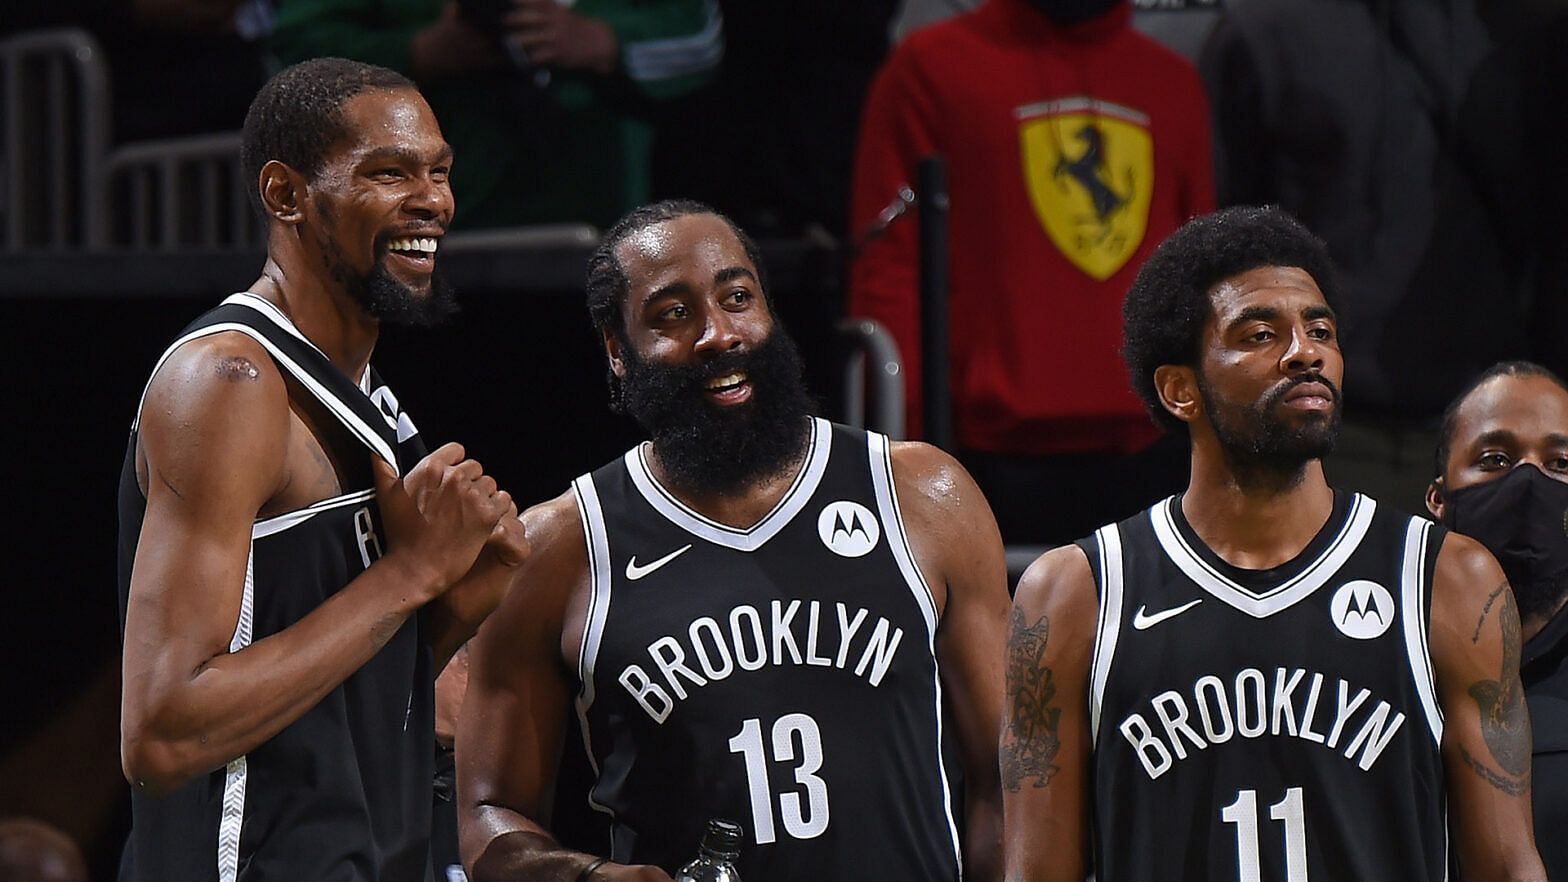 The Brooklyn Nets are still looking forward to a healthy and available Big 3 before the season ends. [NBA.com]